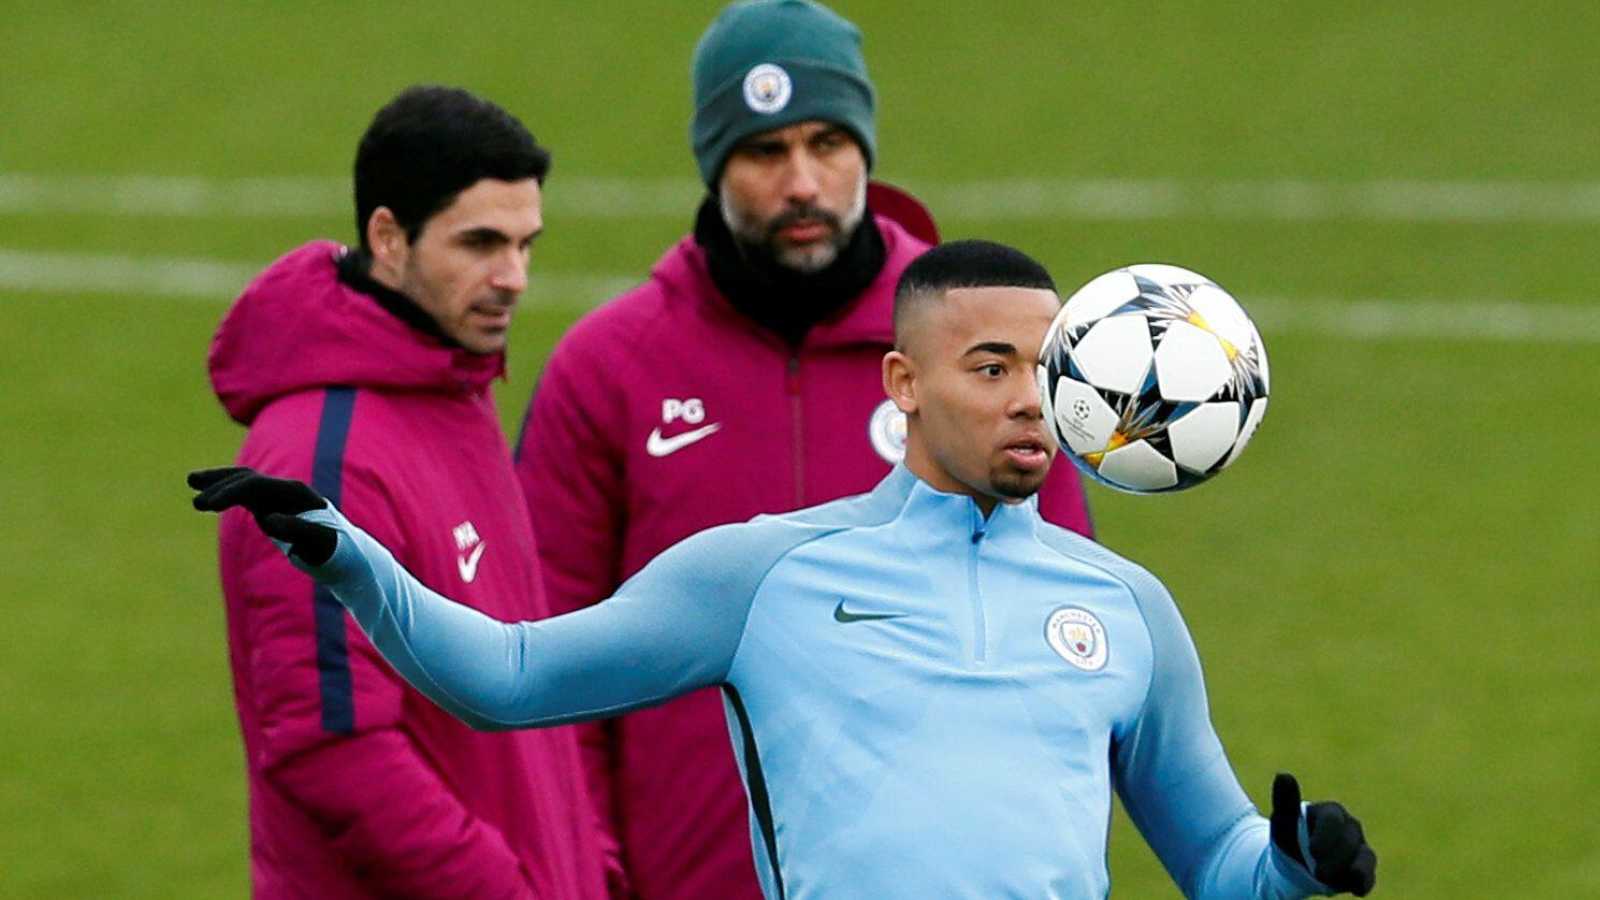 Premier League 2022/23: Arsenal's new £45m signing Gabriel Jesus out to 'win everything', says "I don’t want to be the new Thierry Henry" - Check out